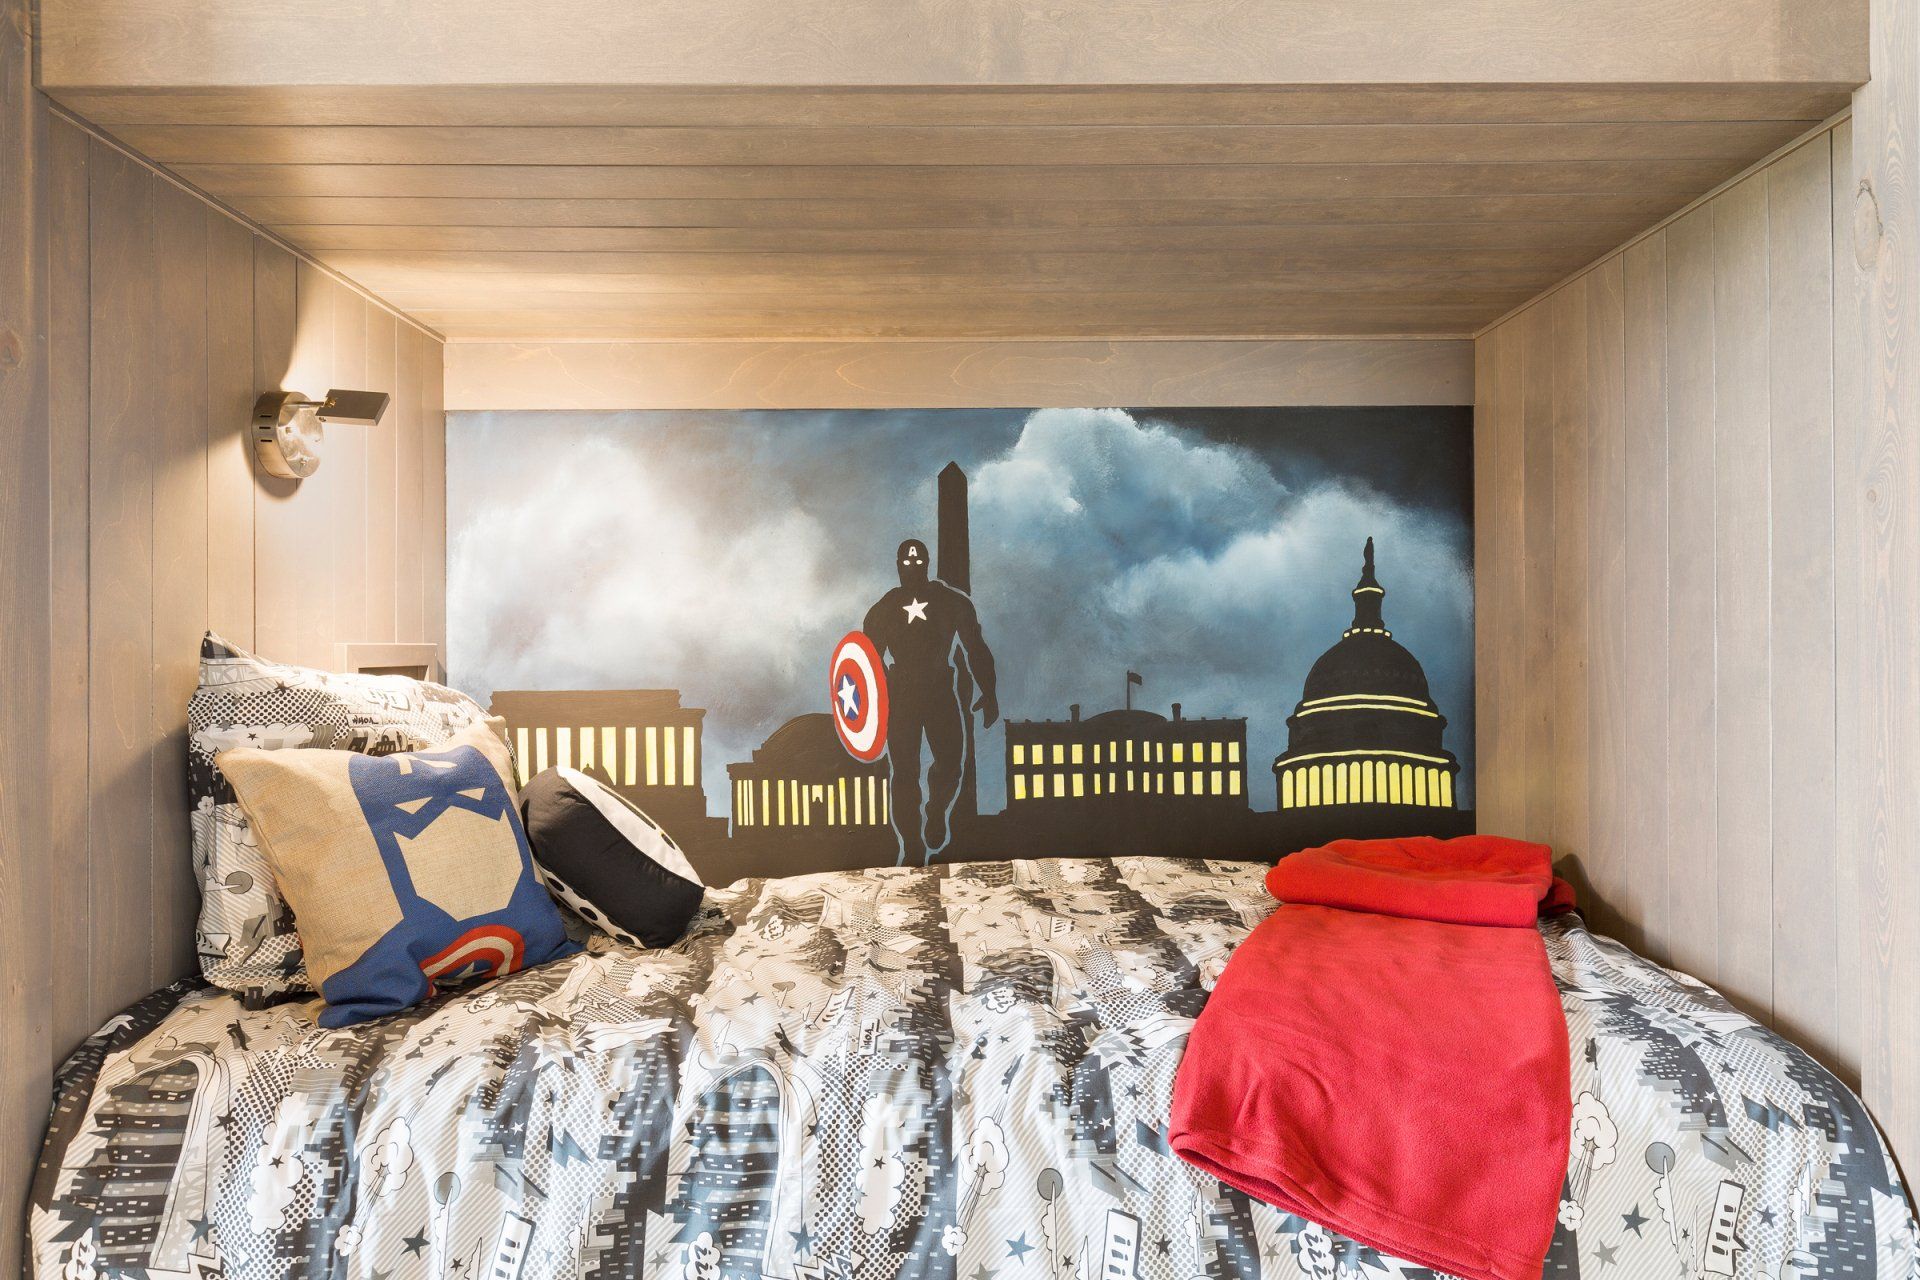 a bed with a superhero mural on the wall above it